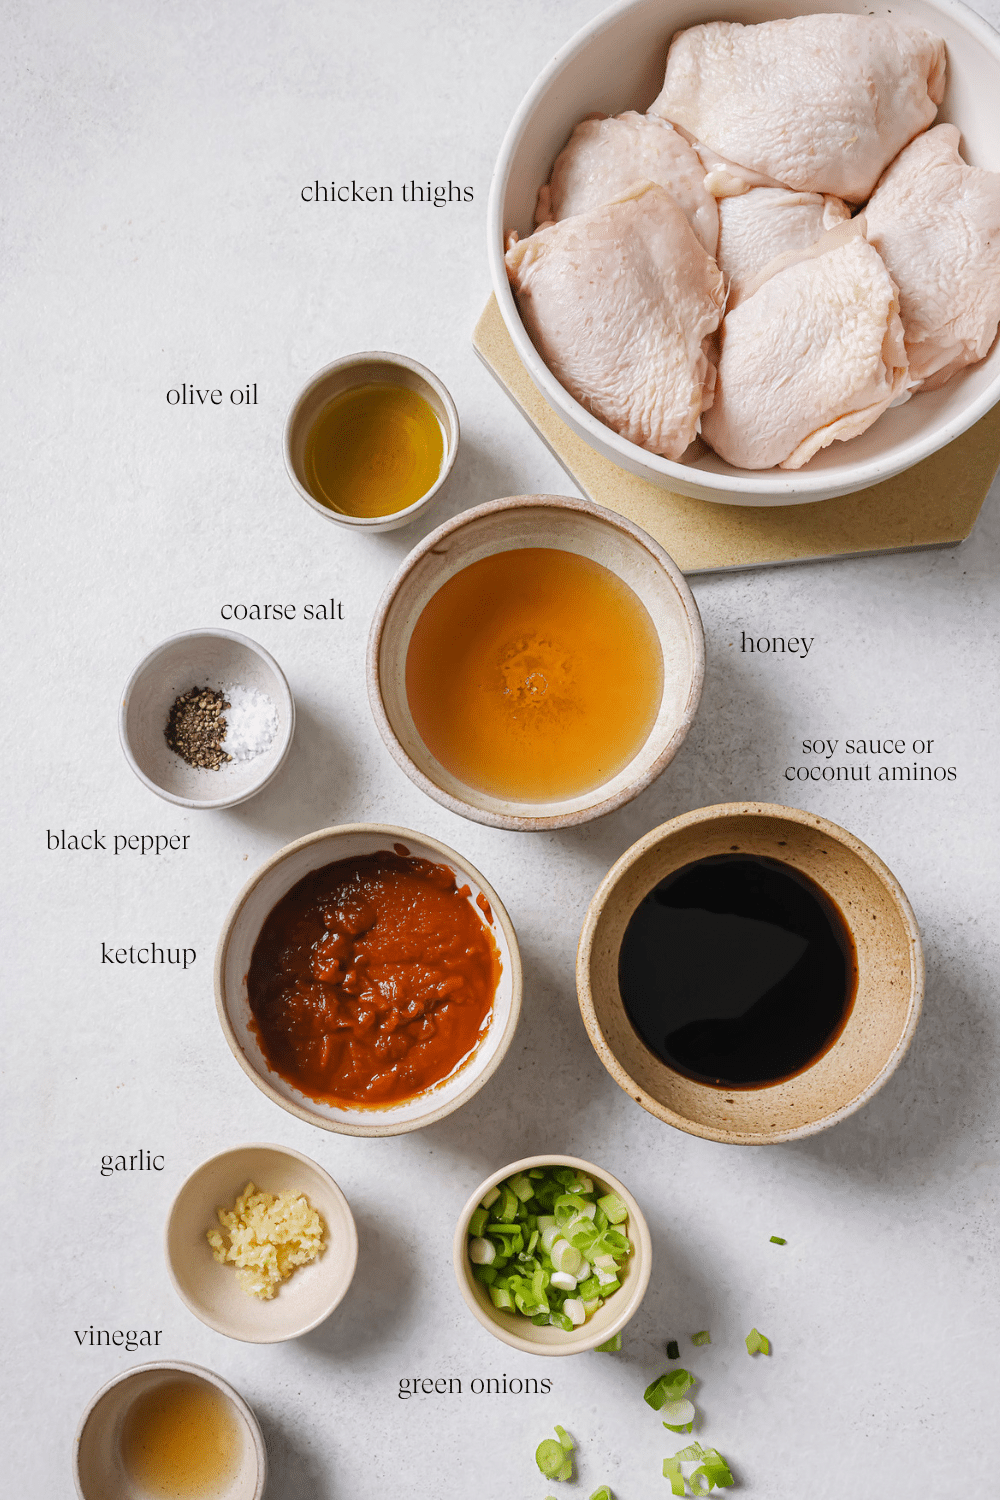 Pre-measured ingredients in small bowls.